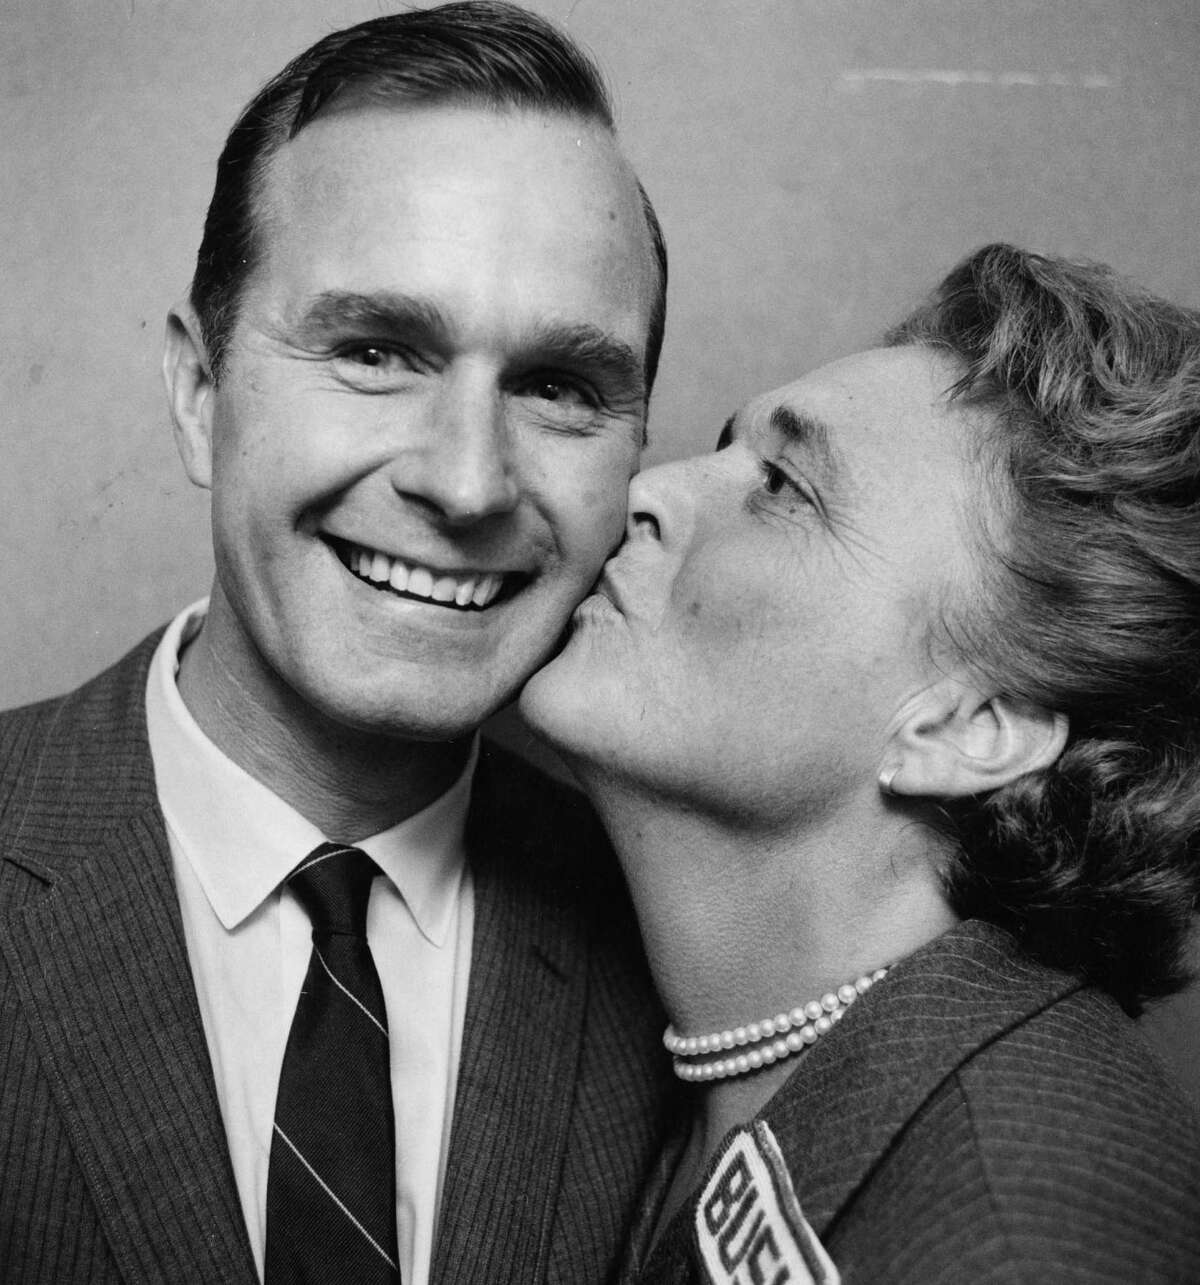 Newly-elected U.S. Rep. George Bush flashes a winner's smile as his wife, Barbara, gives him a victory kiss following his 1966 election to a seat in from the 7th district in Texas. See George and Barbara's love story told in photos.